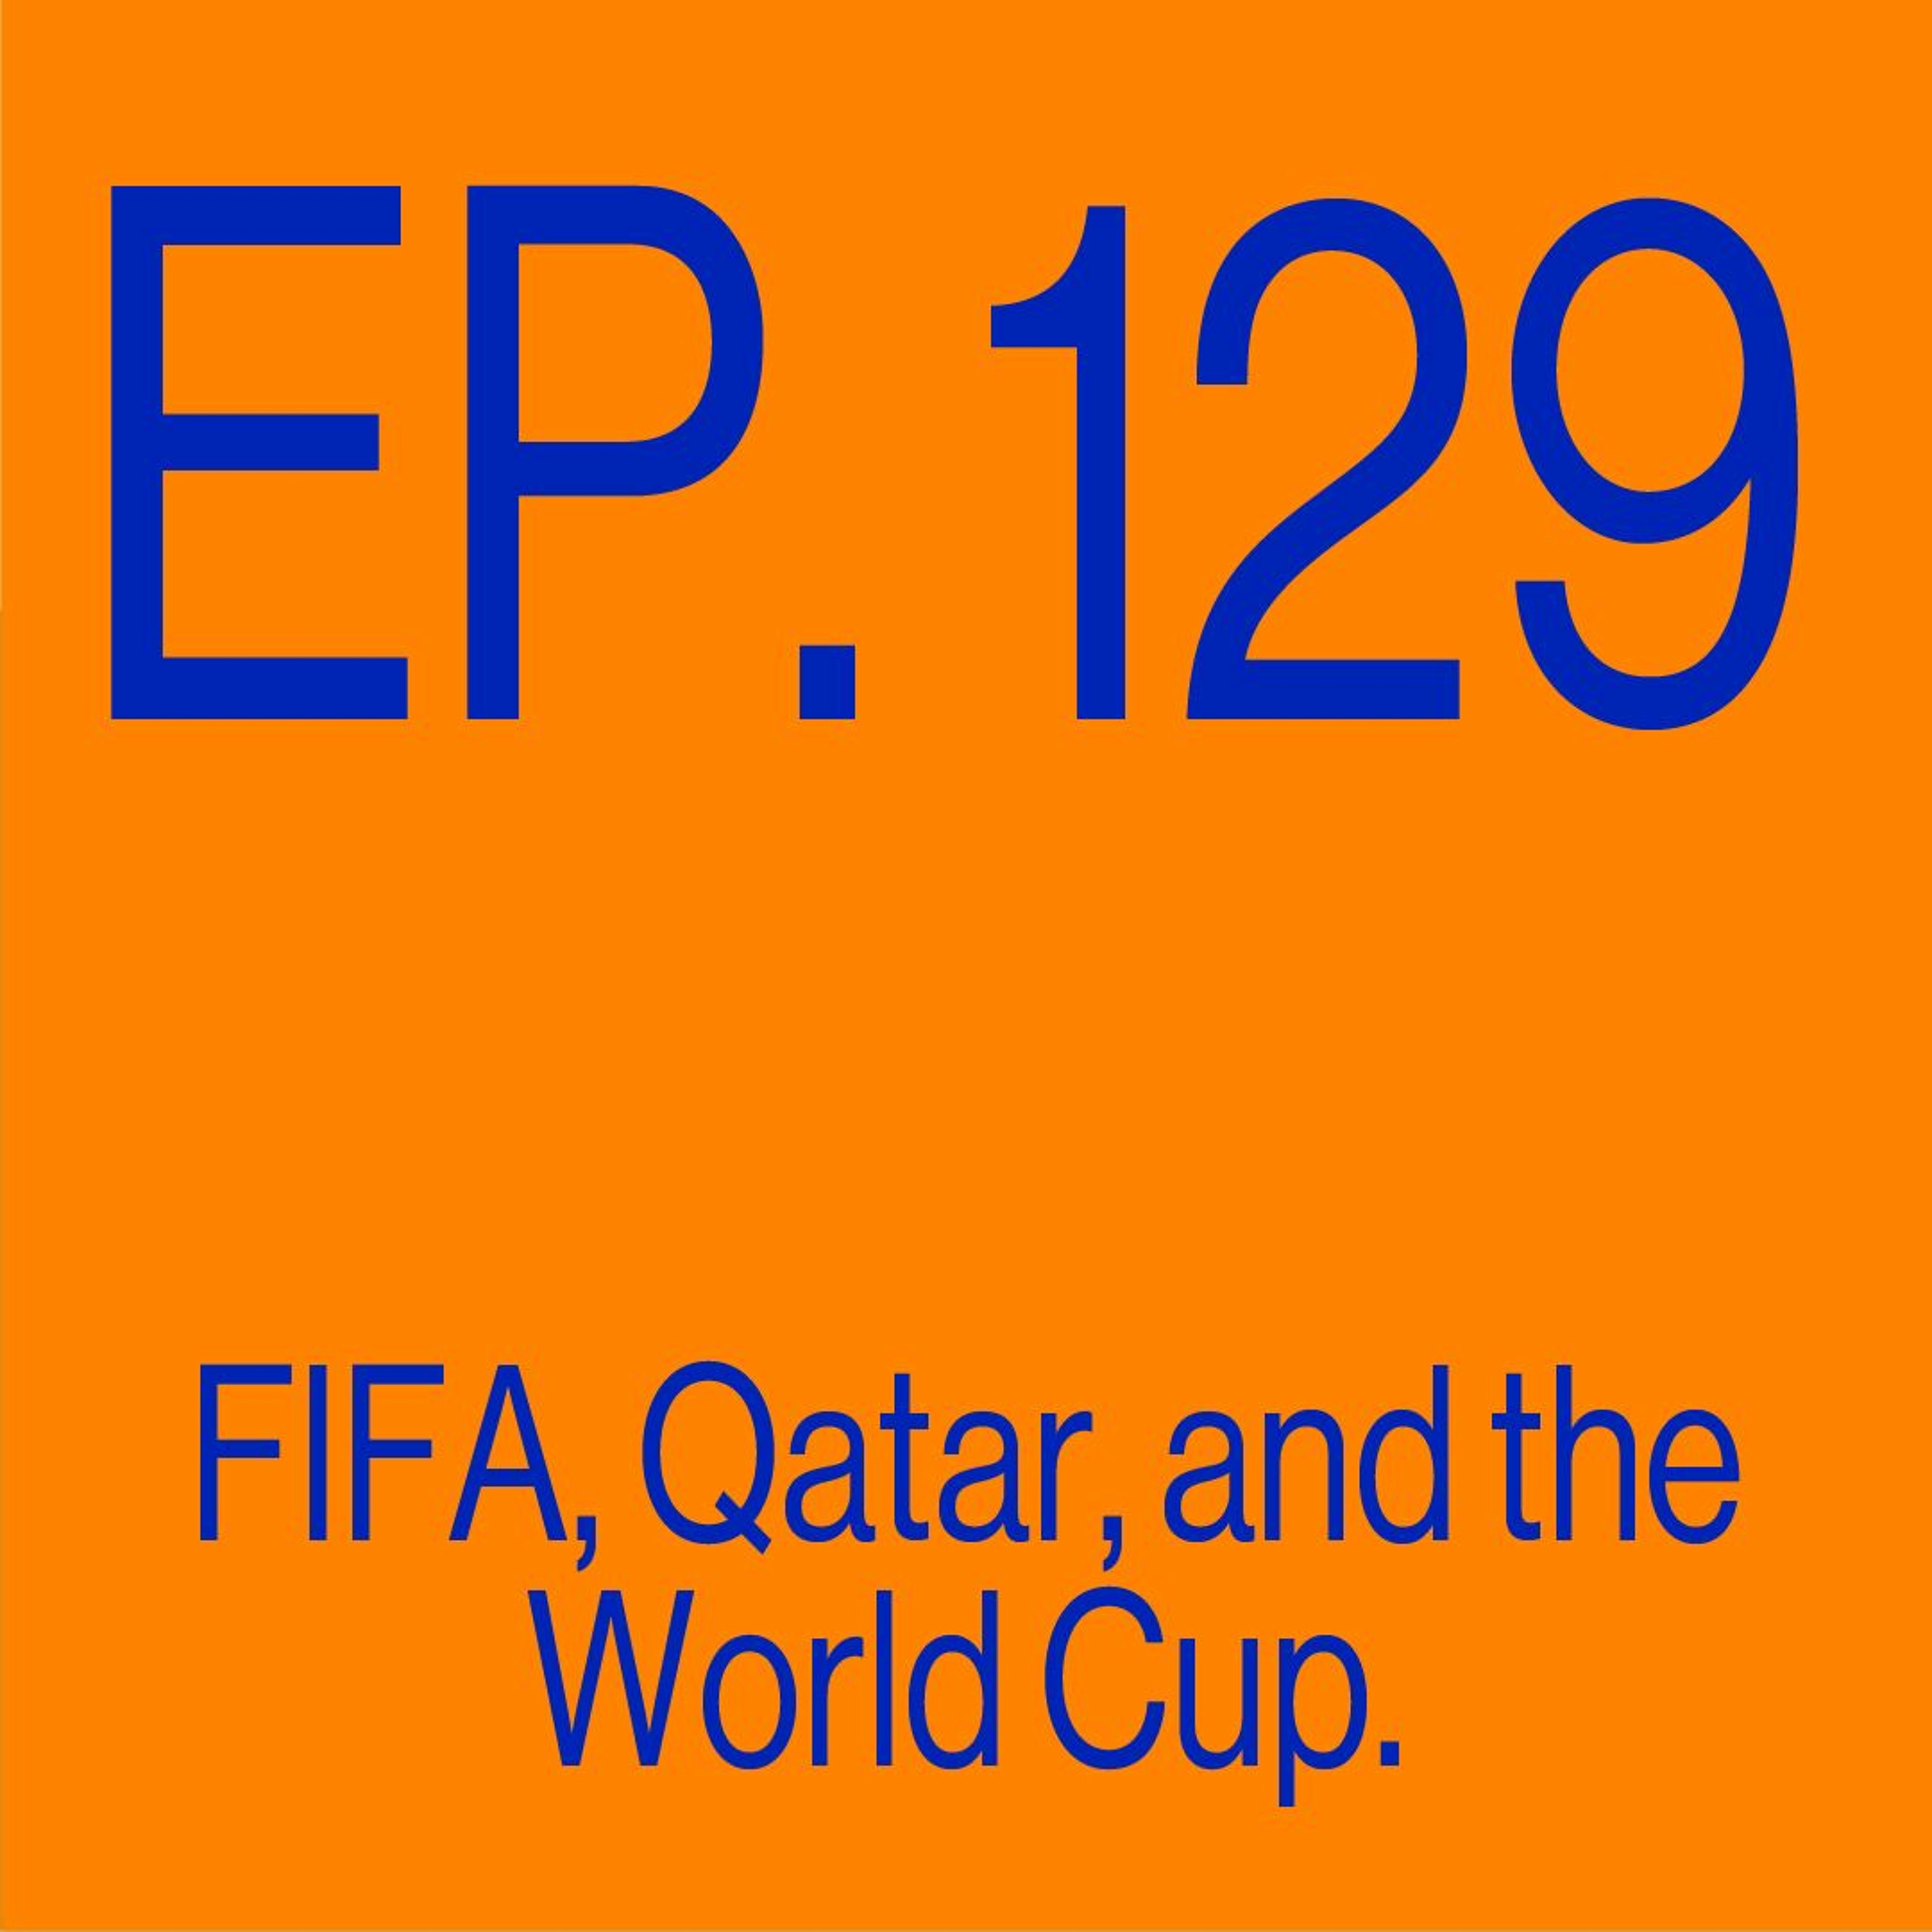 Episode 129: FIFA, Qatar, and the World Cup